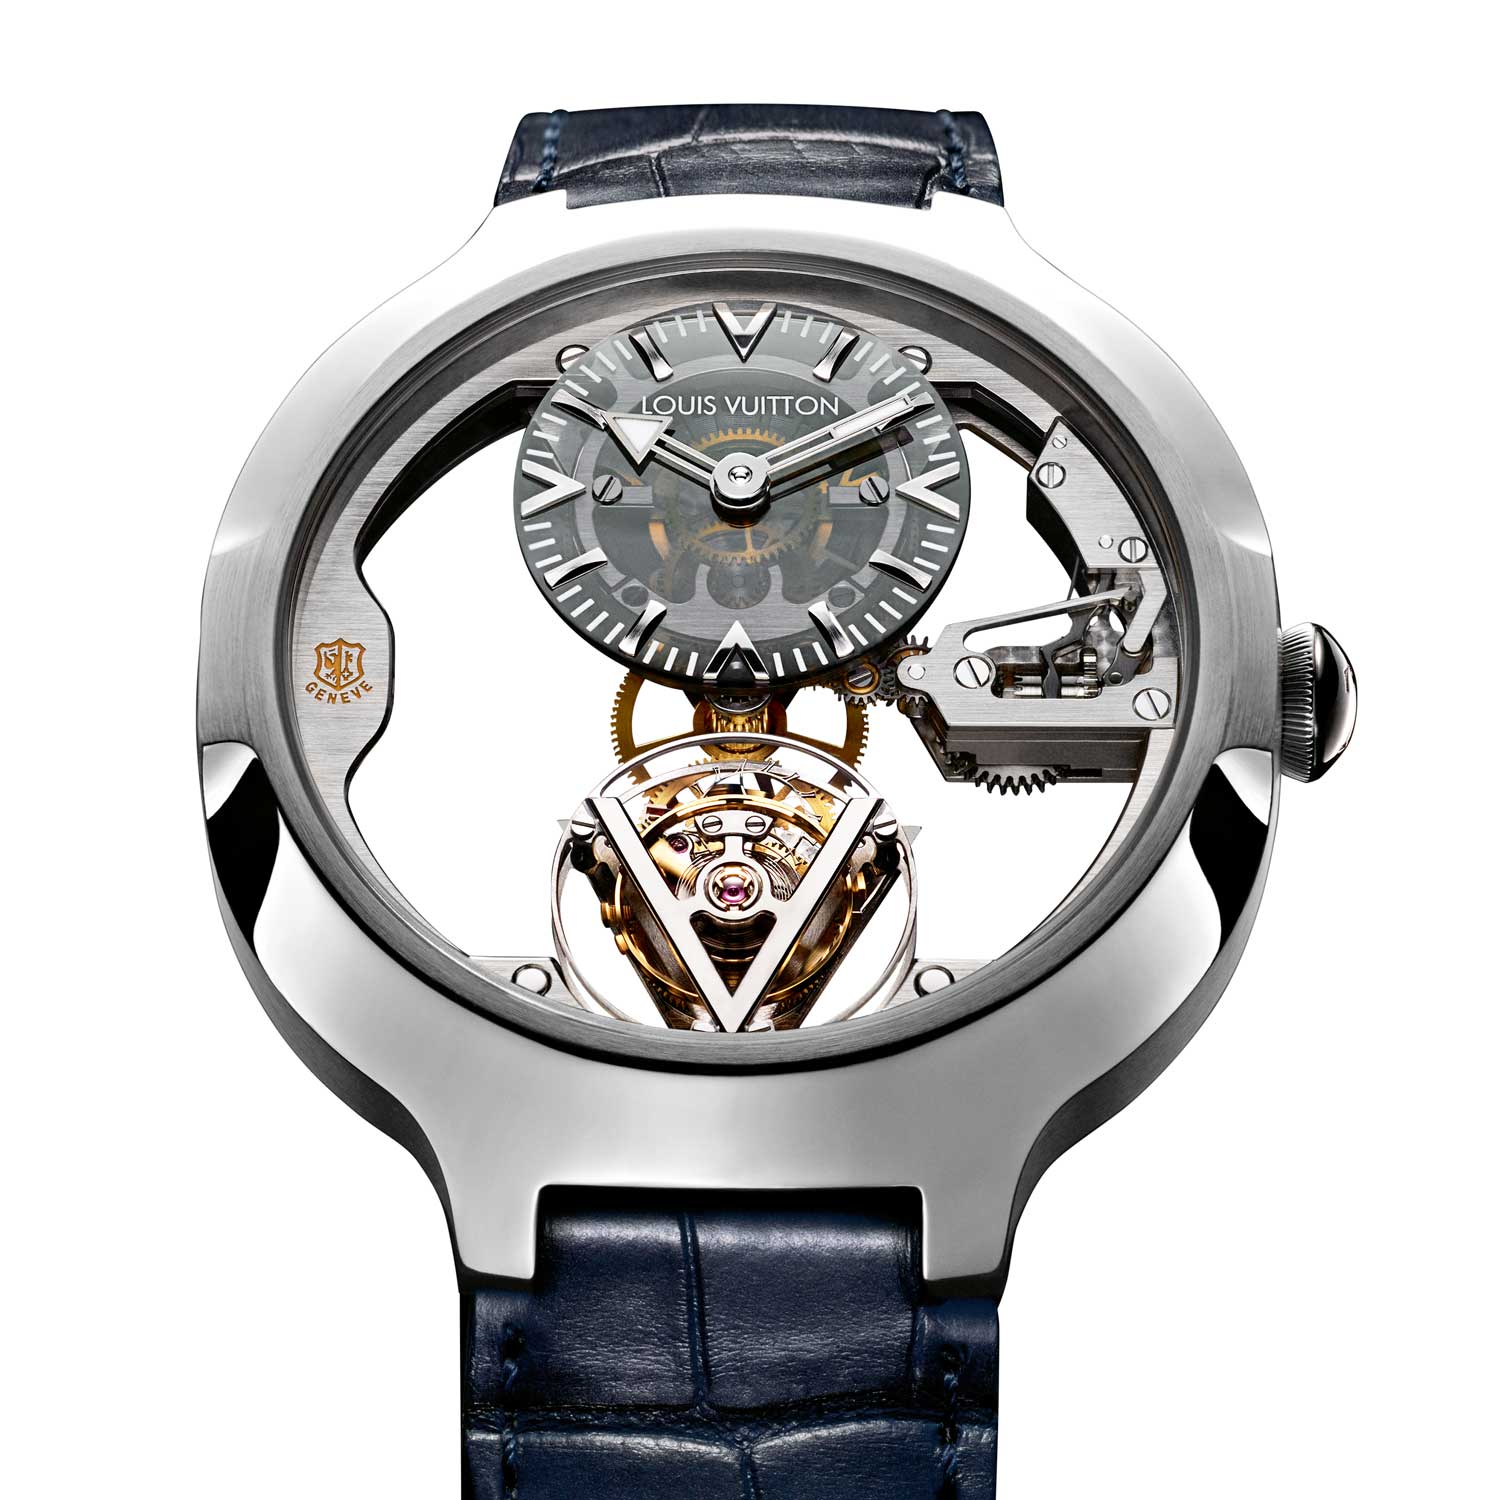 The Voyager Flying Tourbillon Poinçon de Genève with a dramatically openworked movement that bears the Geneva Seal